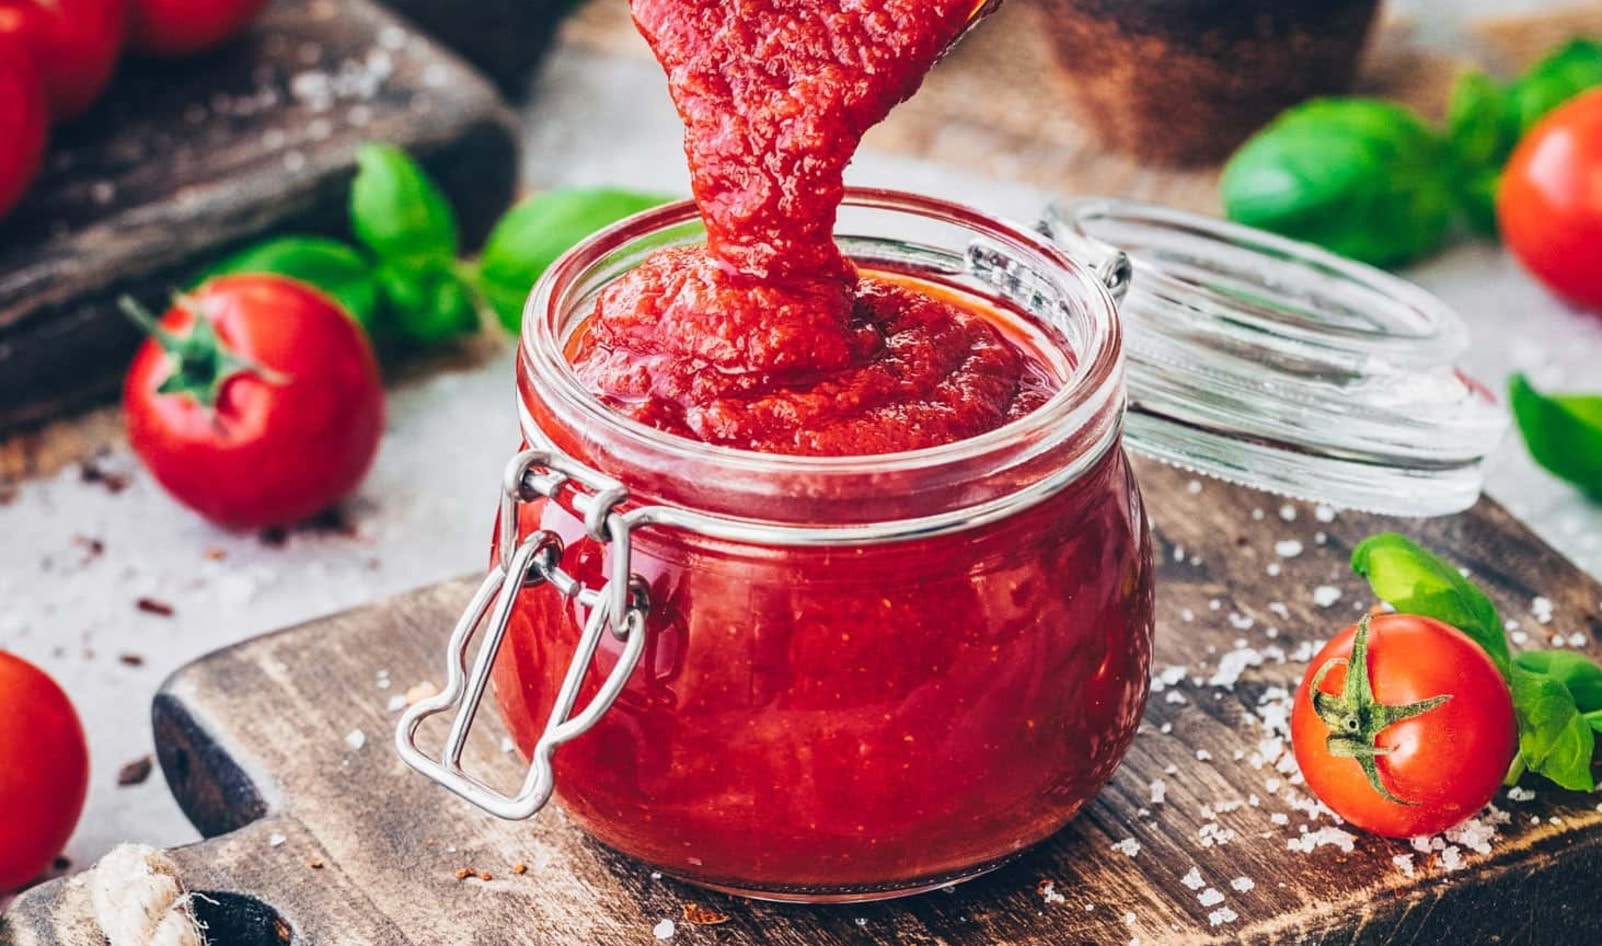 Make This the Year You Make Your Own Ketchup: 7 Easy, Quick Recipes